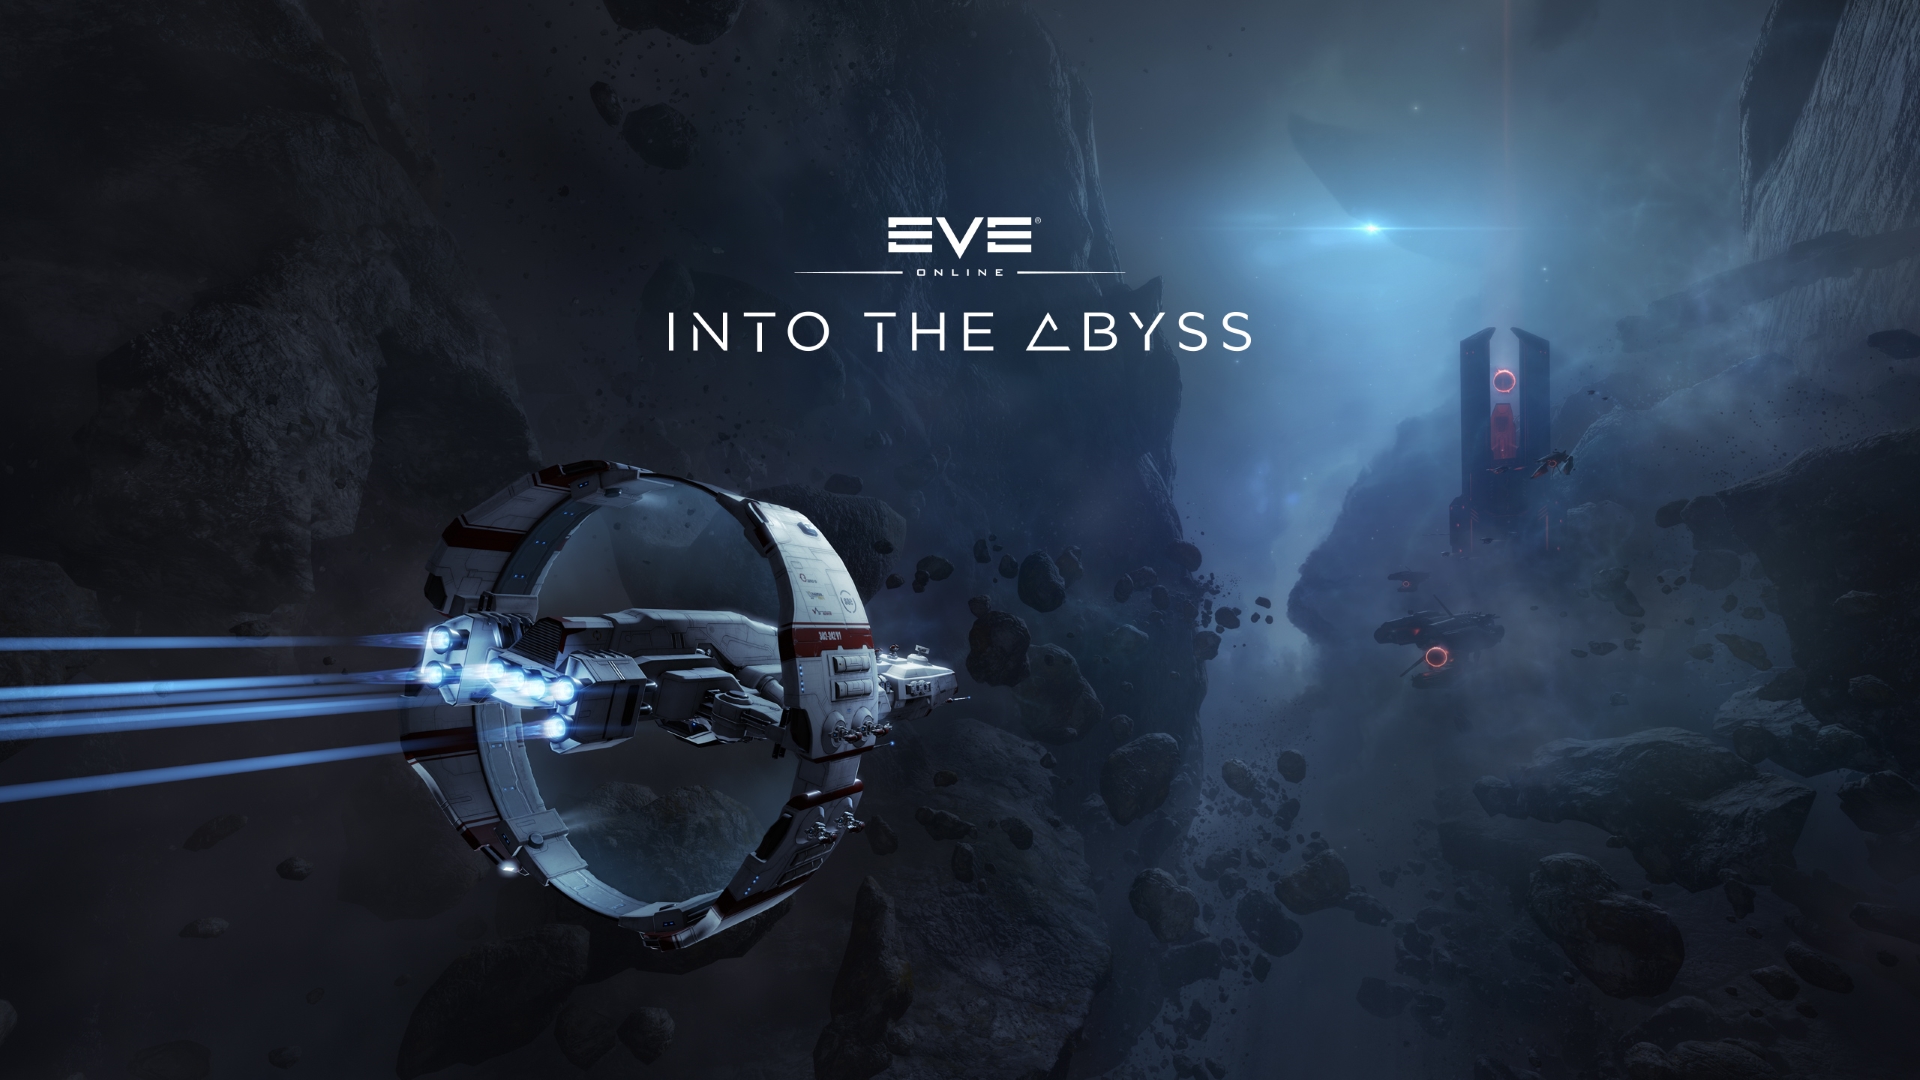 Return to Abyss download the new version